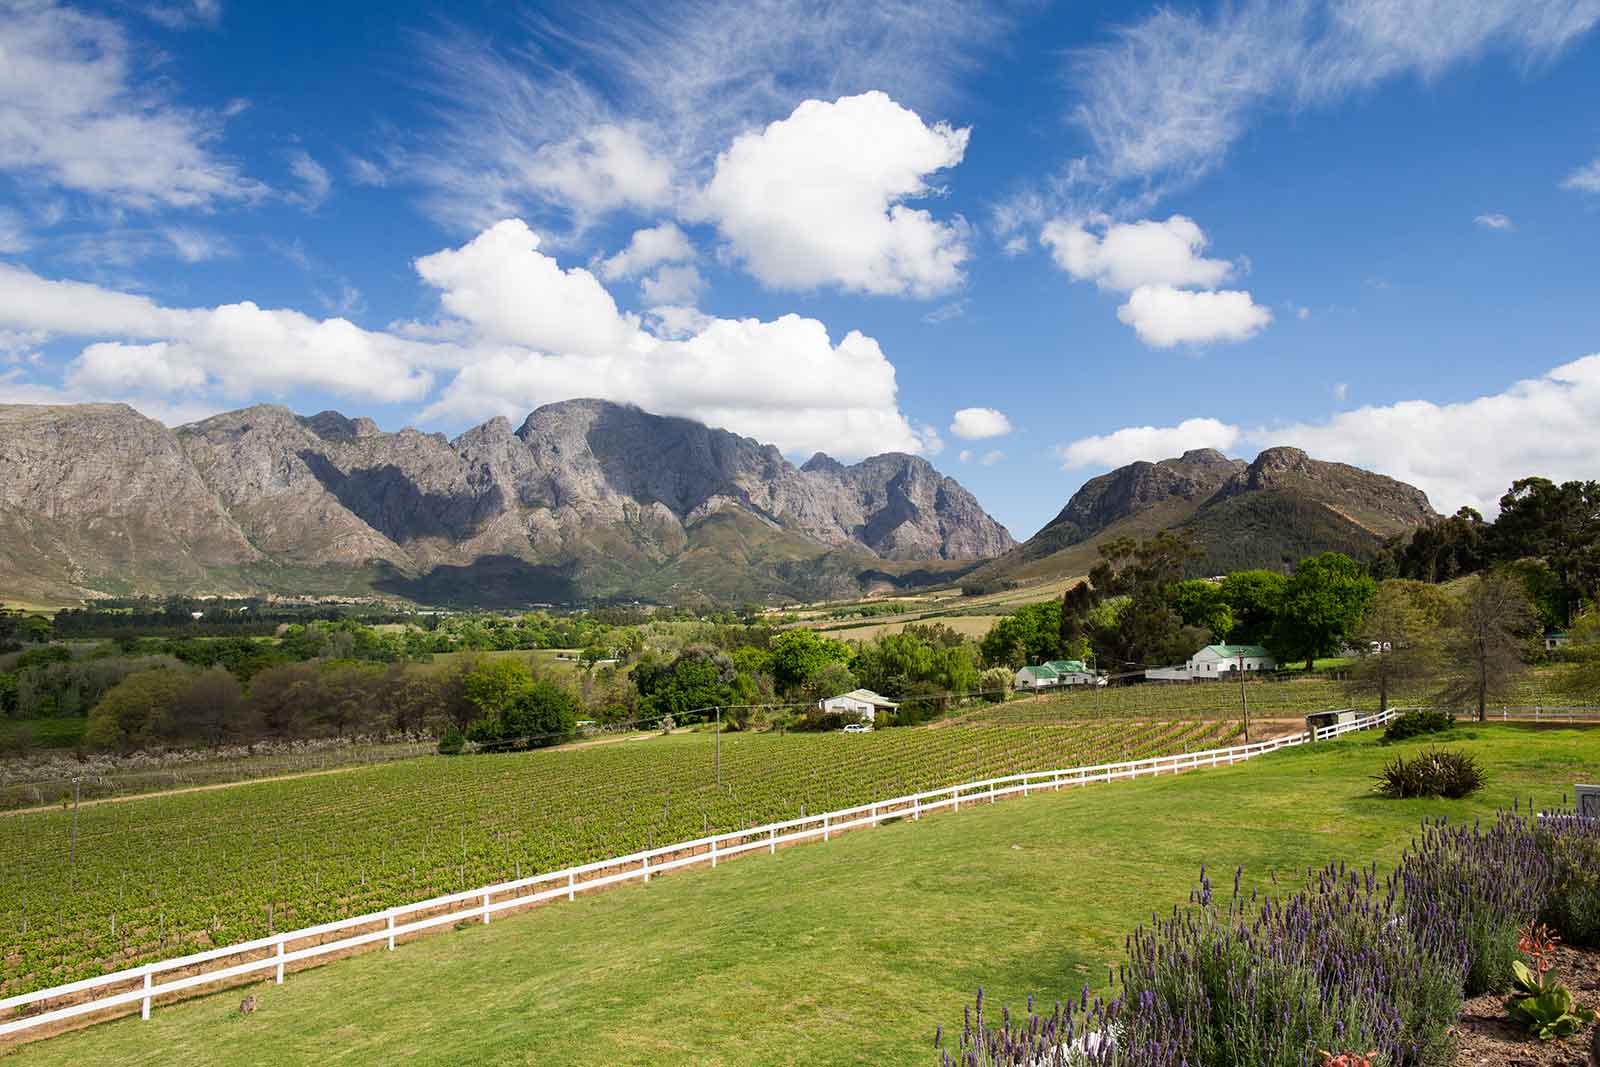 Client Feedback: From the Scenic Cape Winelands to Luxury in the Kruger